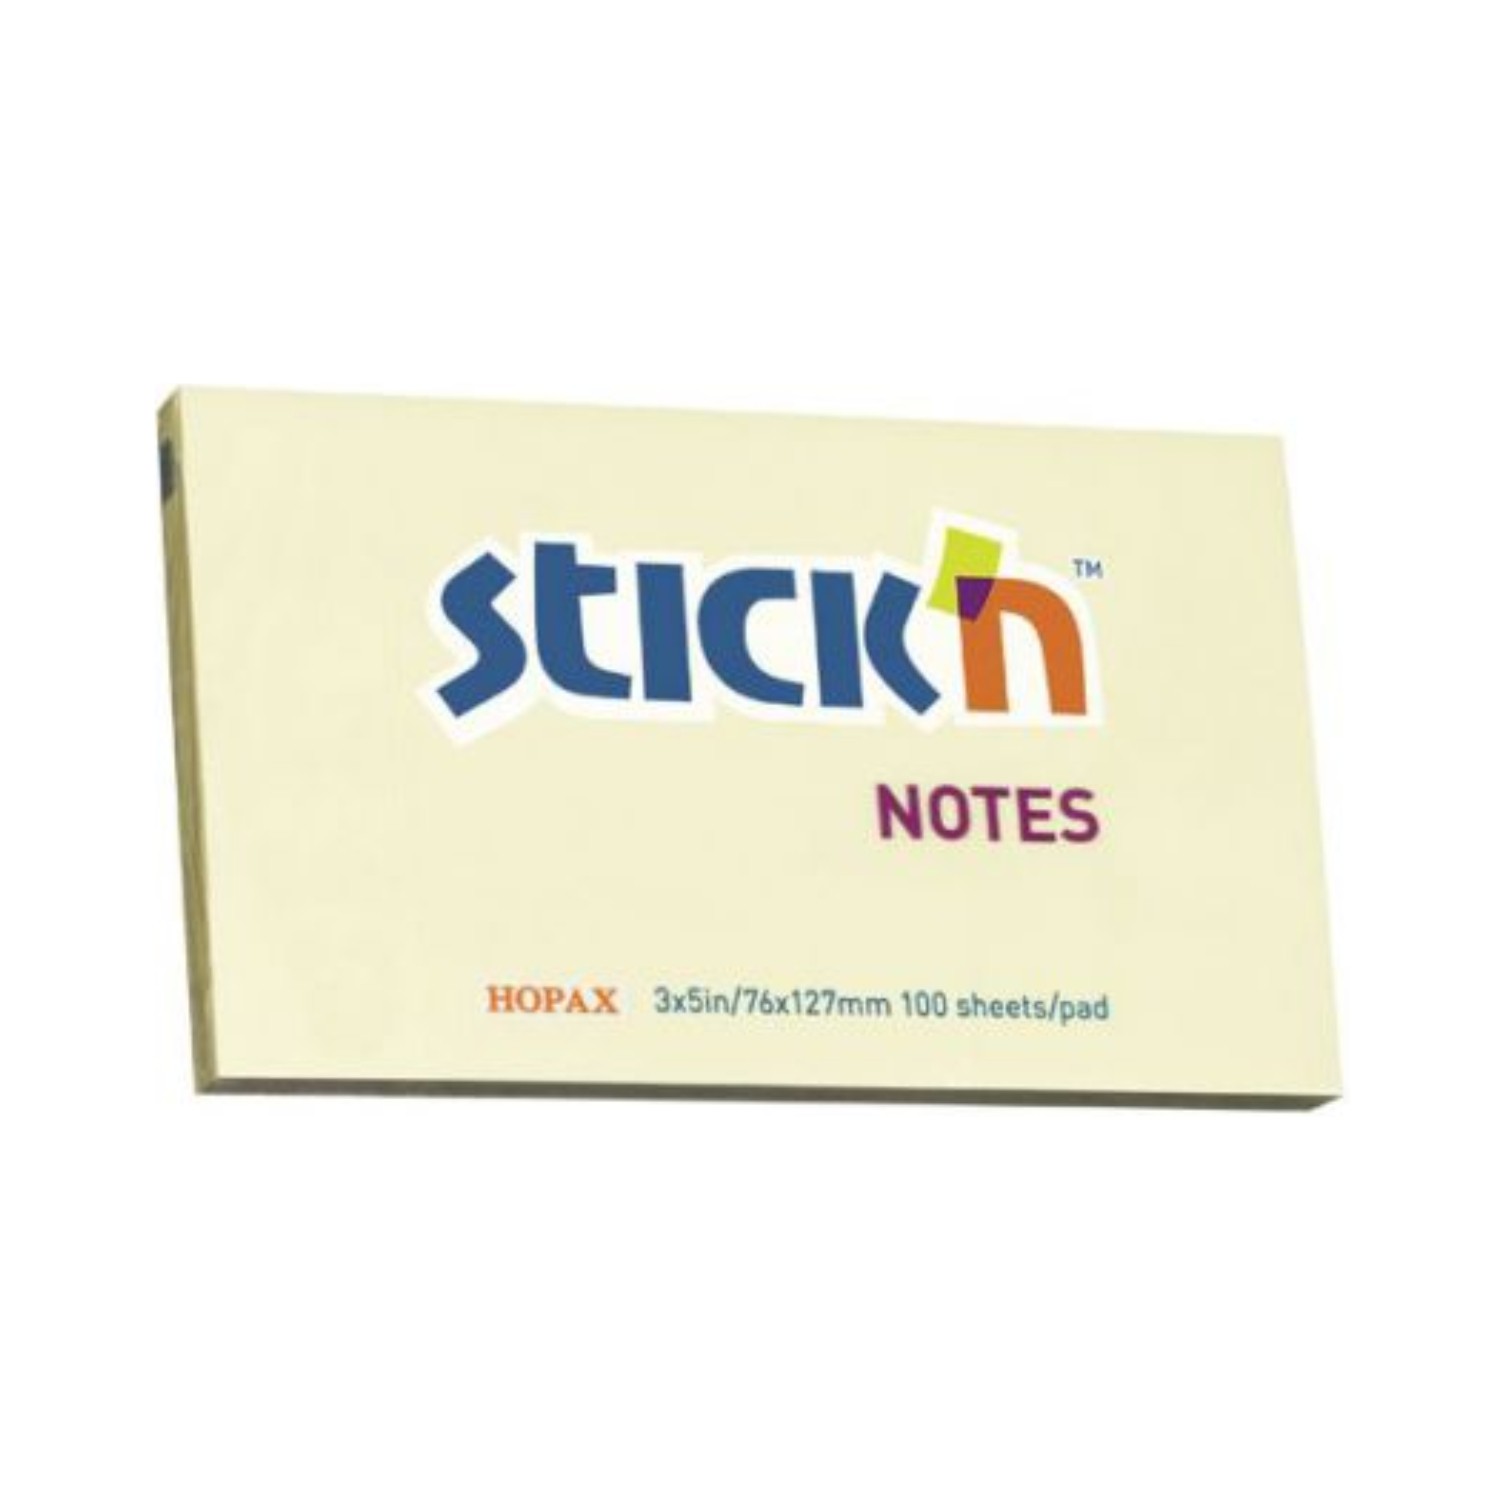 Stick+%27n+Sticky+Notes+76+x+127mm+Yellow